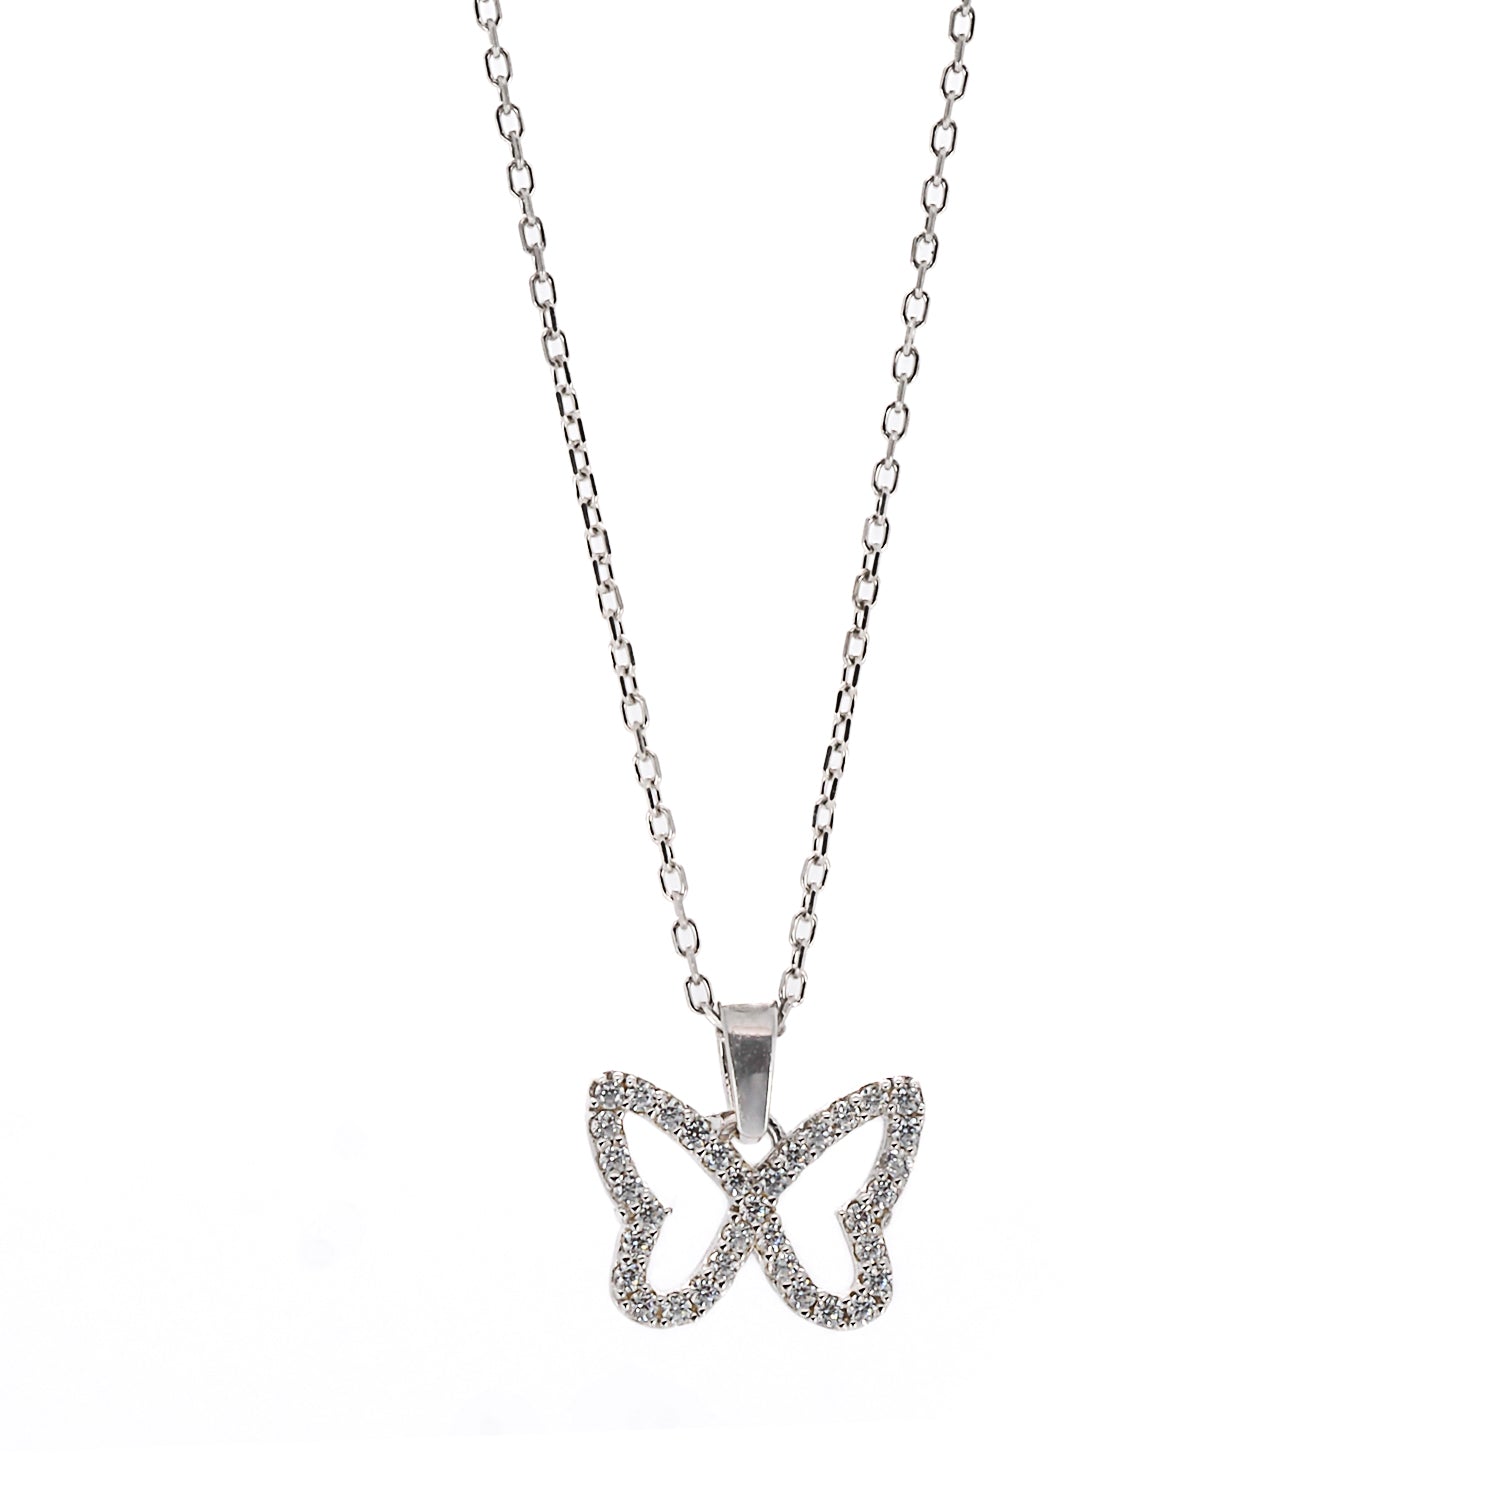 The Silver Sparkly Butterfly Necklace, a symbol of transformation and beauty.